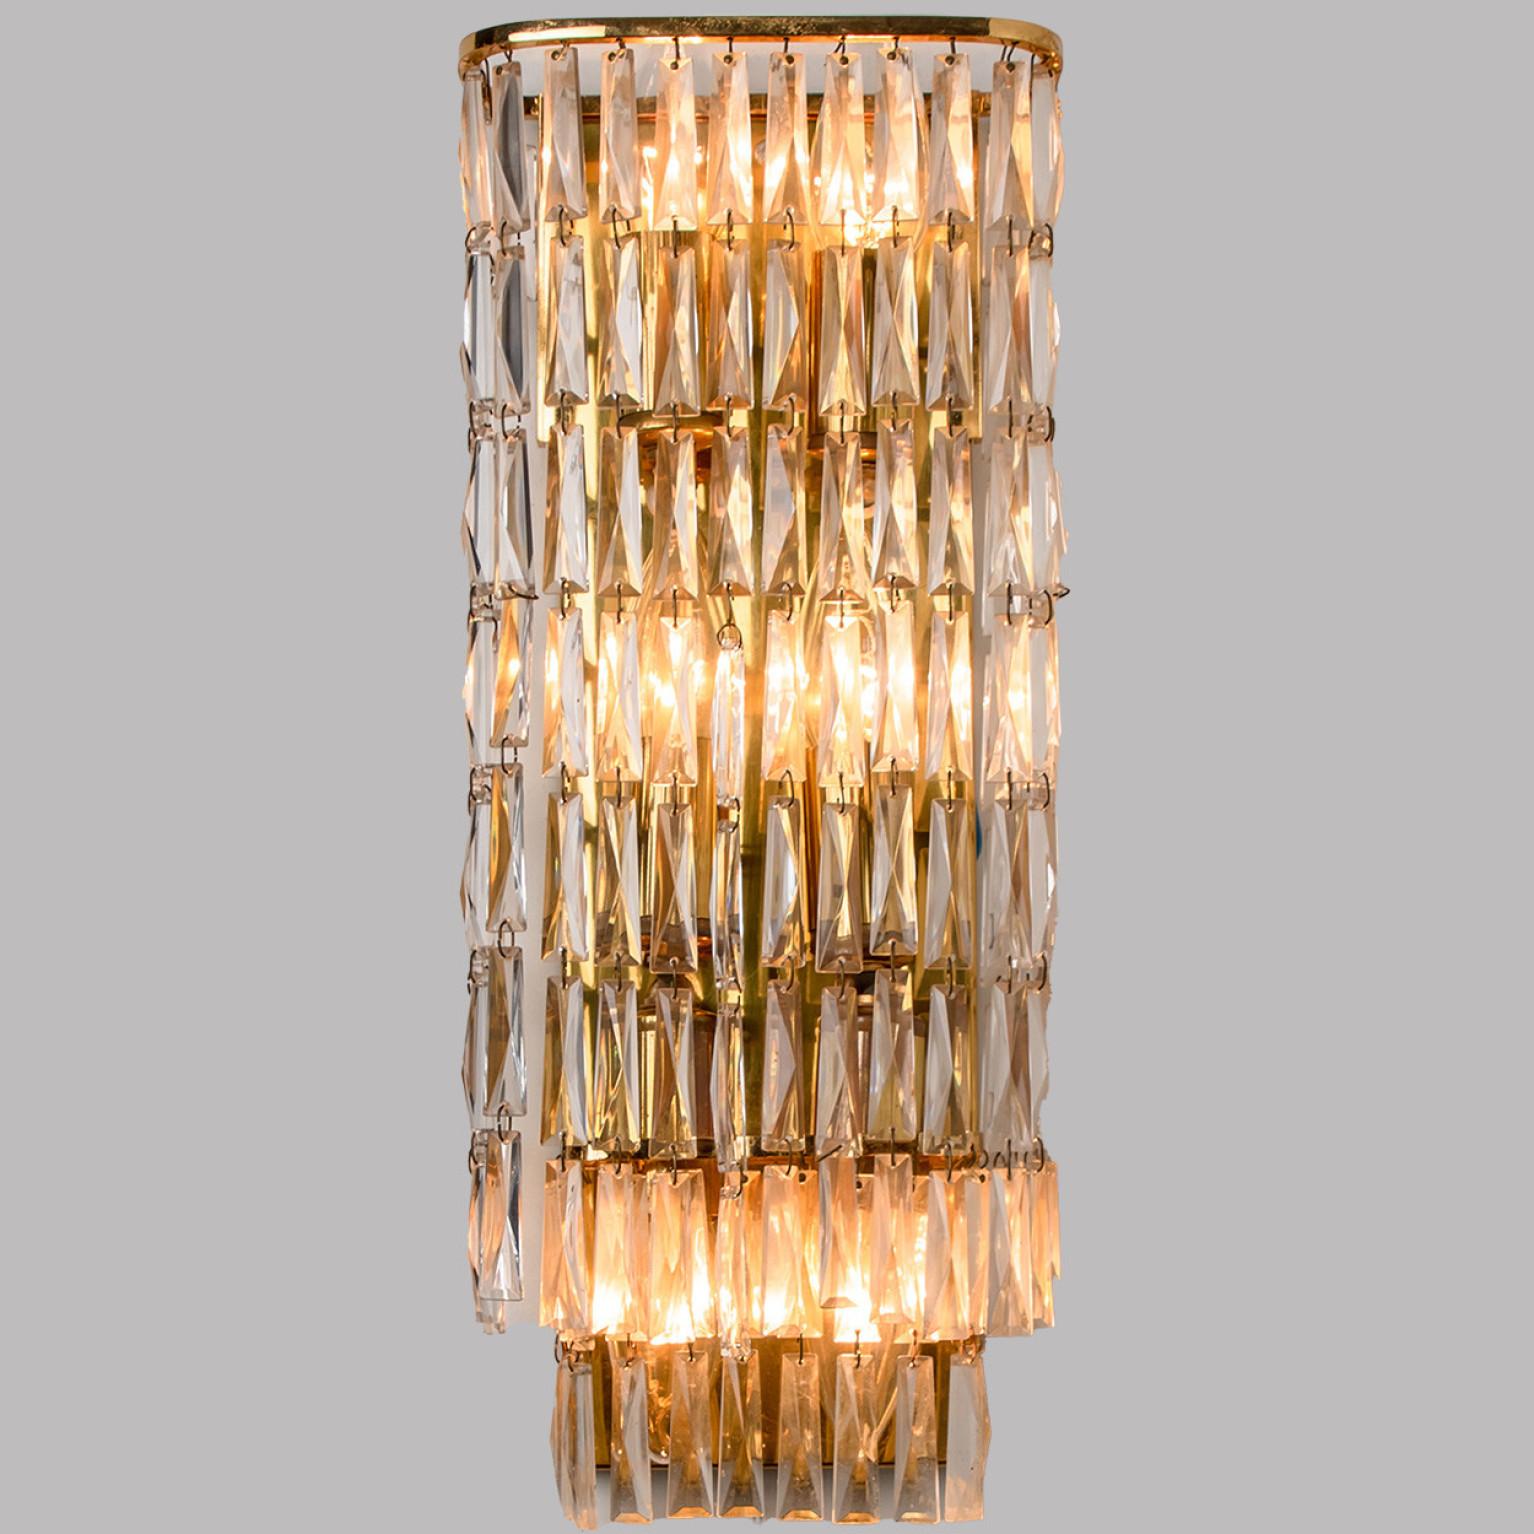 1 of the 6 Clear Gold, Glass Messing Crystal Wall Lights, Bakalowits, 1970 For Sale 5